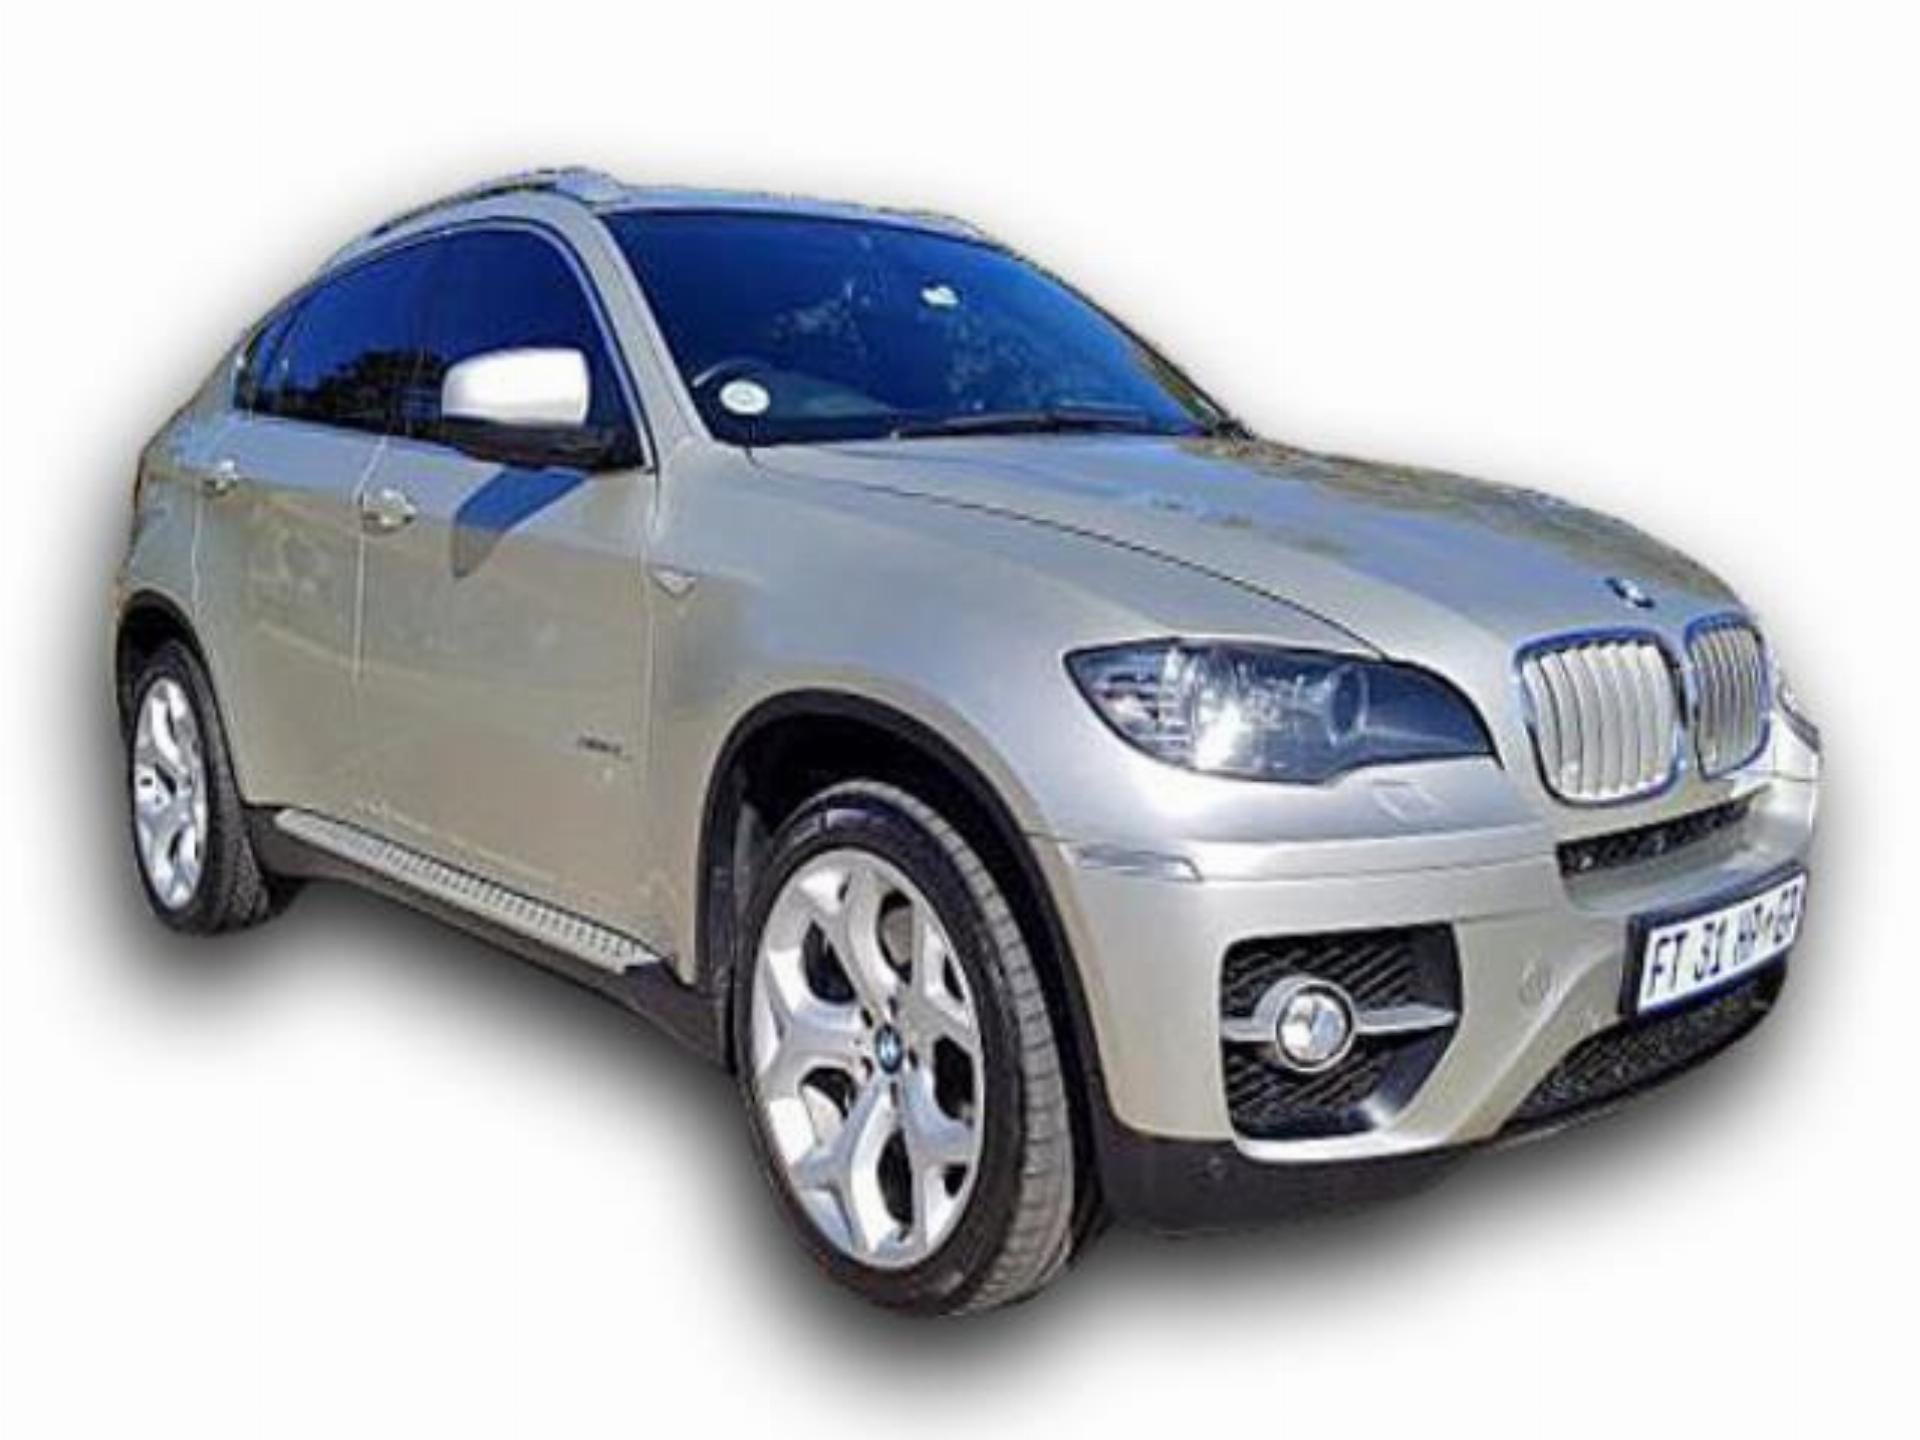 Used BMW X6 XDRIVE50I 2011 on auction - PV1026634